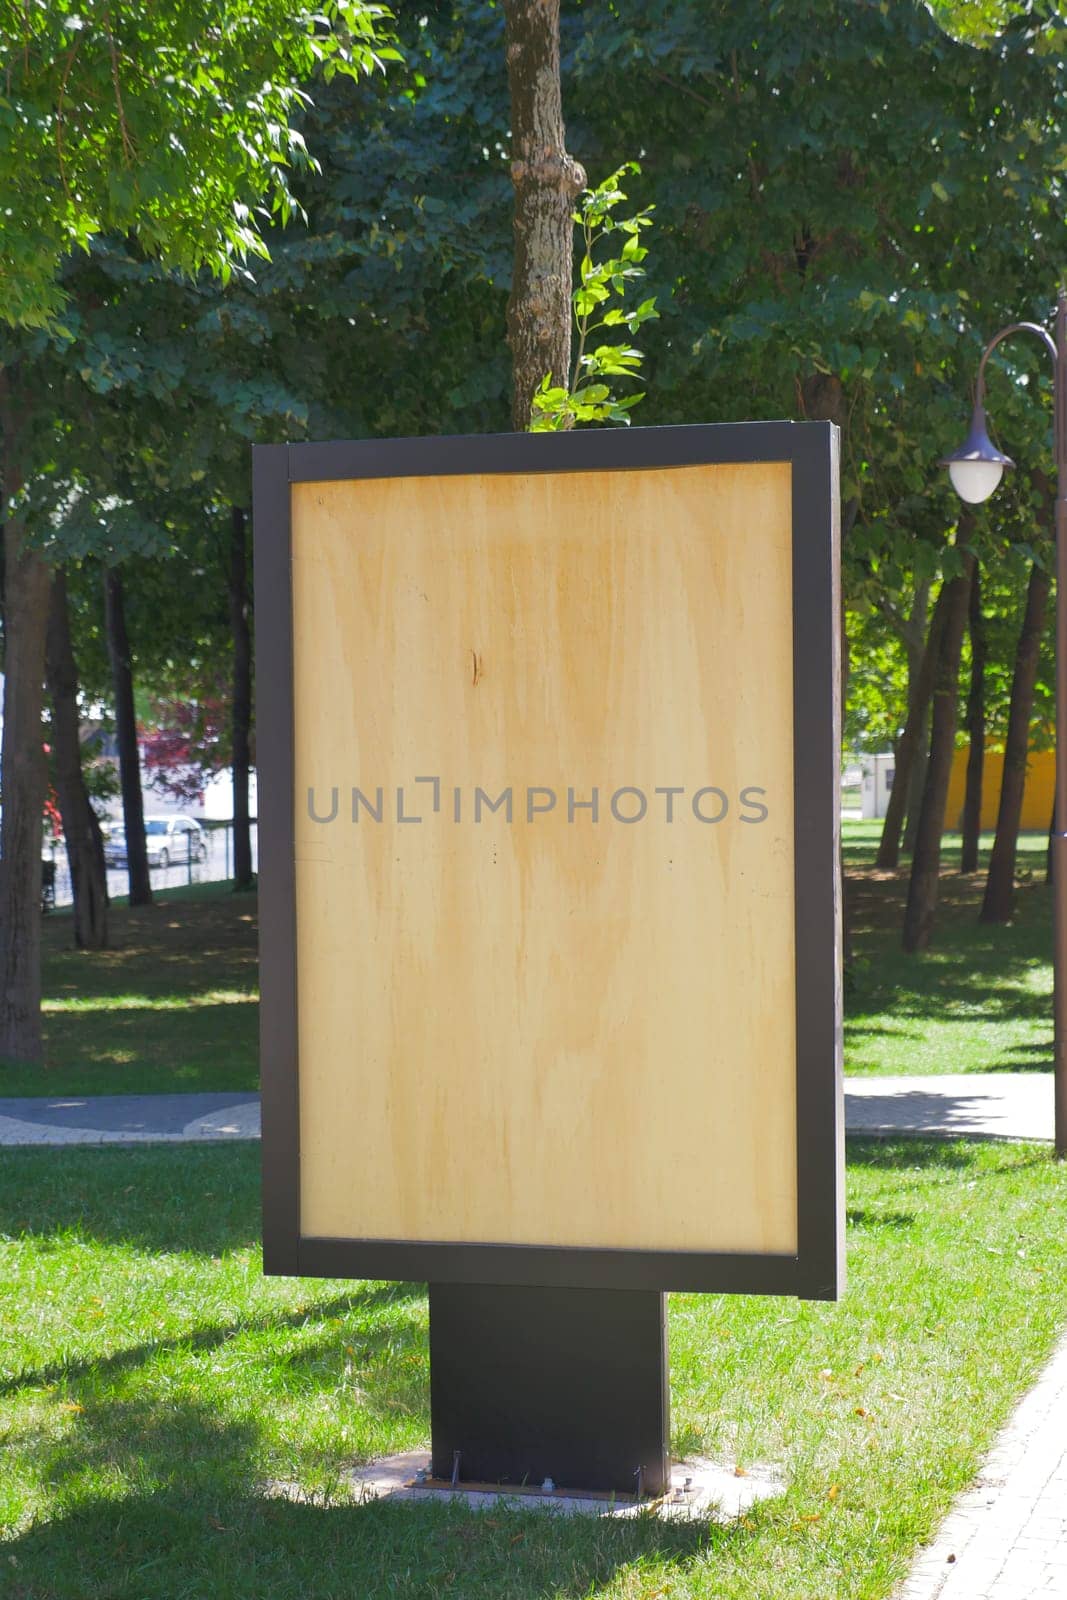 A wooden billboard stands in the park by towfiq007